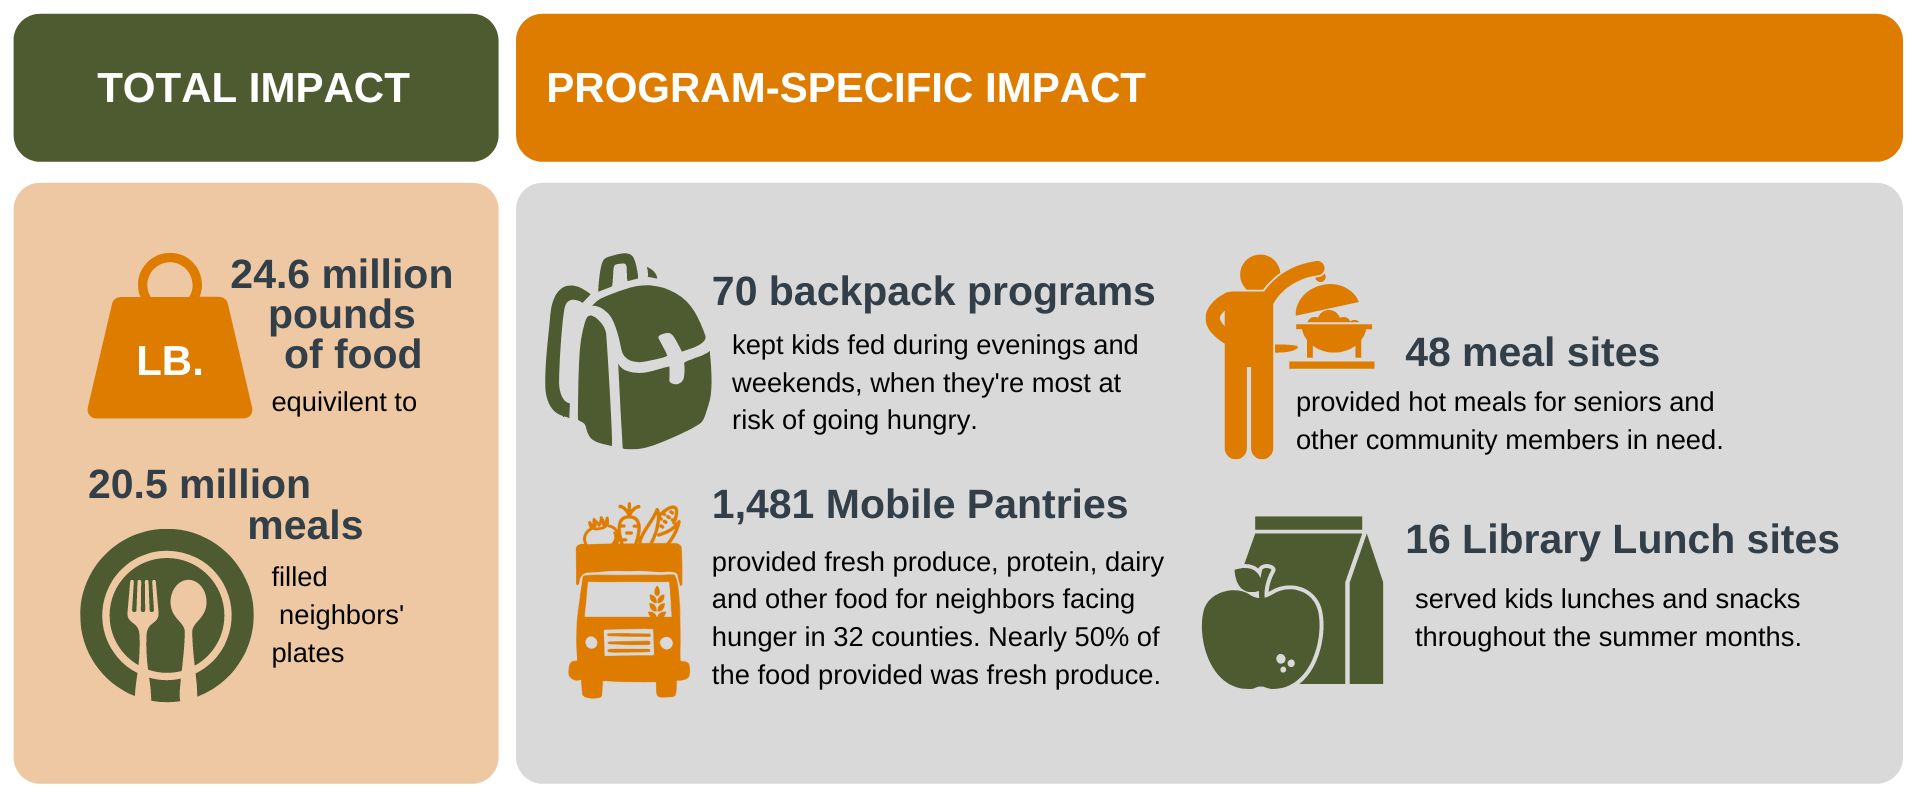 Total impact: 24.6 million pounds of food, equivalent to 20.5 million meals filled neighbors' plates. By program: 70 backpack programs kept kids fed during evenings and weekends when they are most at risk of going hungry. 1,481 mobile pantries provided fresh produce, protein, dairy and other food for neighbors facing hunger in 32 counties. Nearly 50% of the food provided was fresh produce. 48 meal sites provided hot meals for seniors and other community members in need. 16 library lunch sites served kids lunches and snacks throughout the summer months.